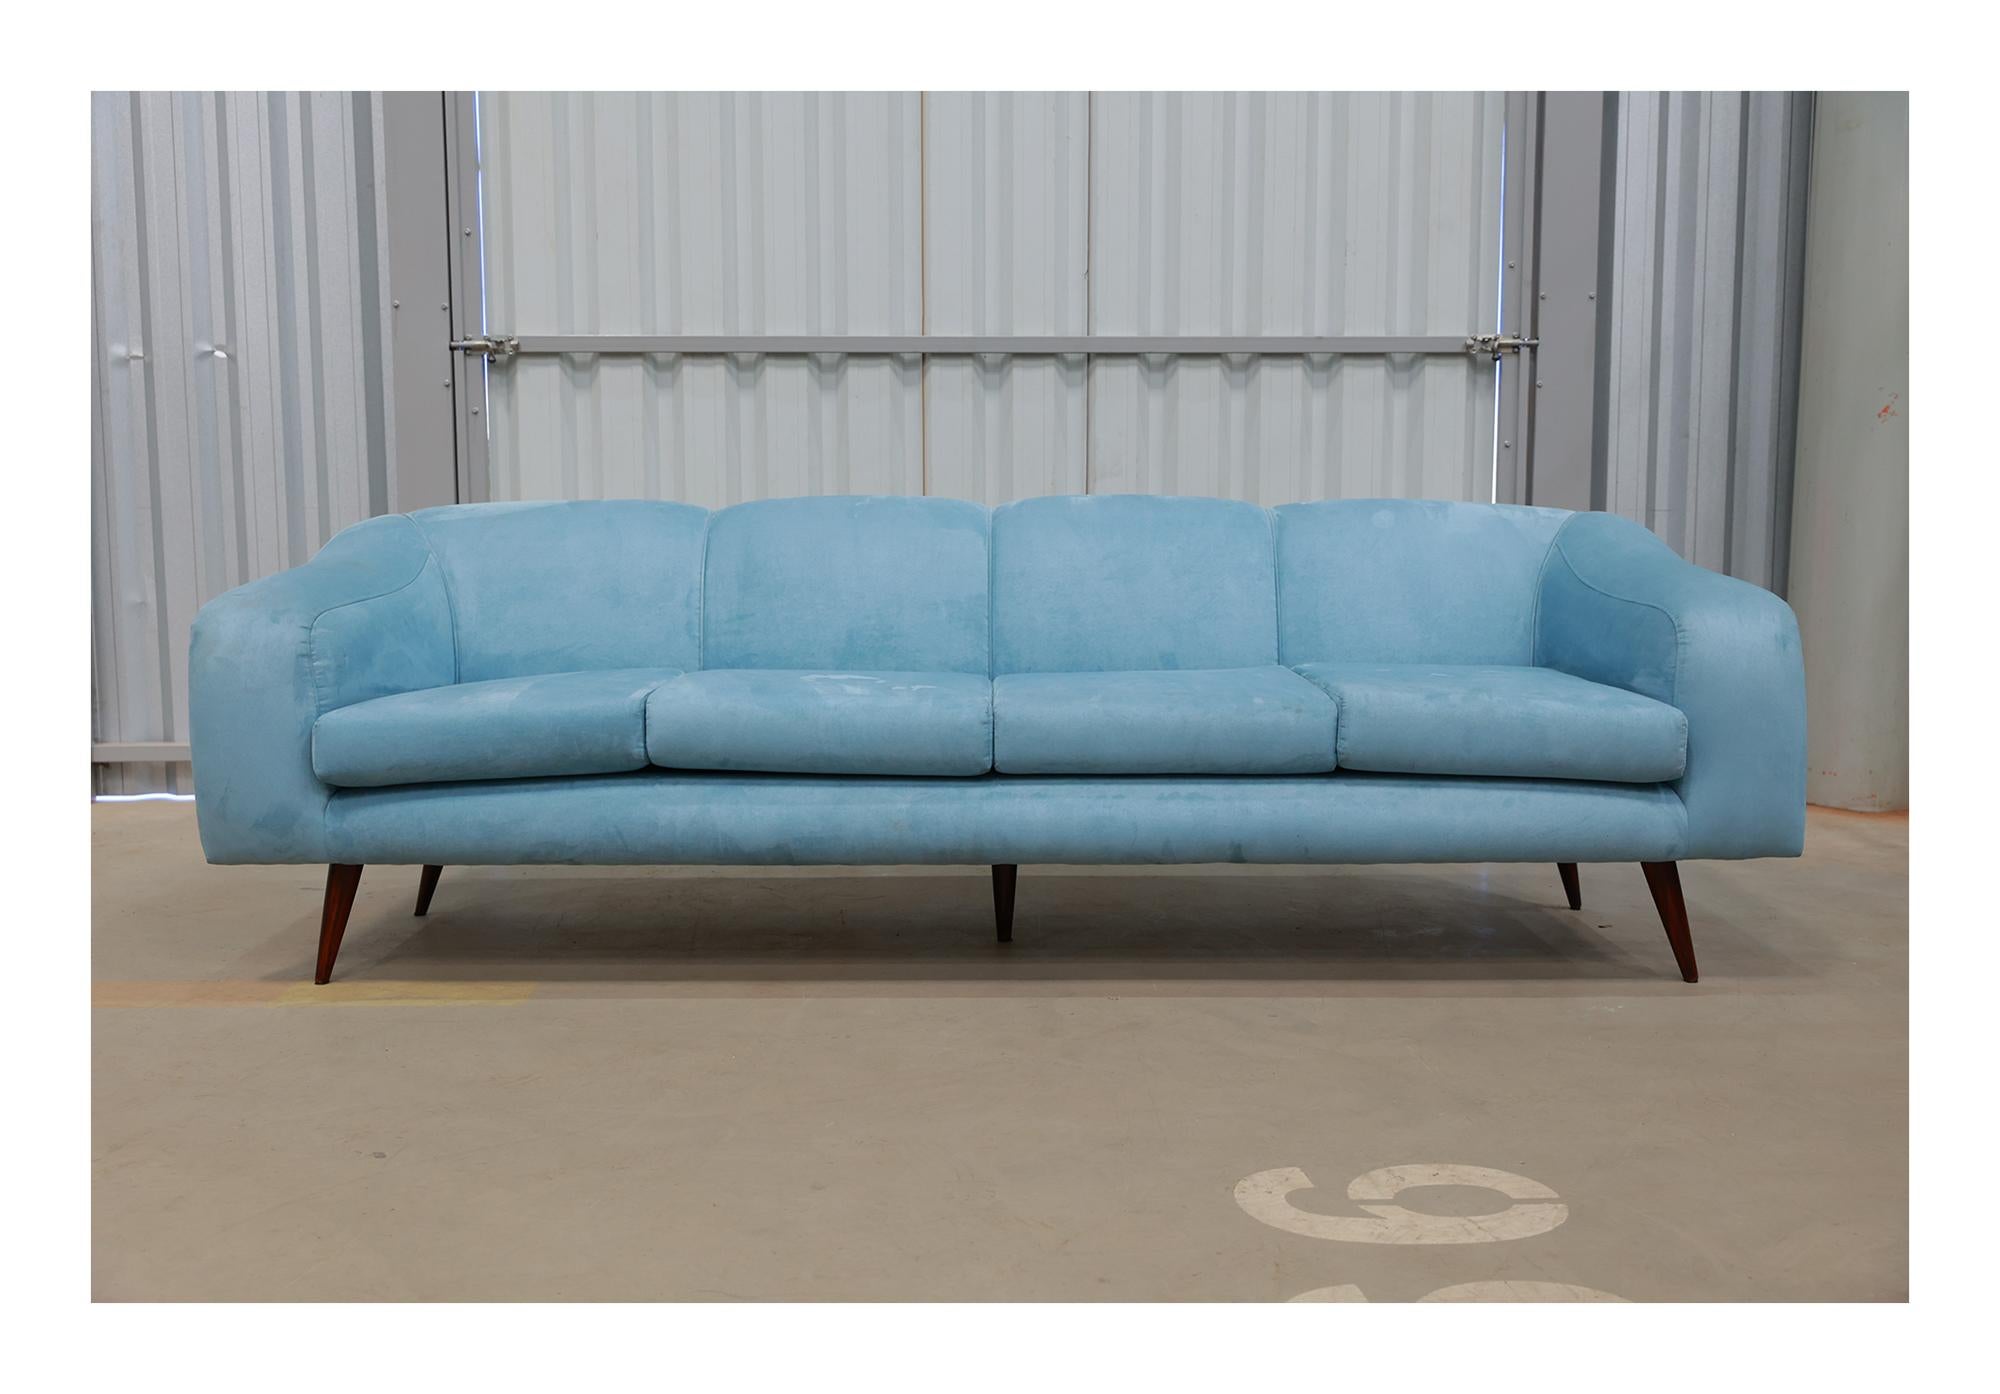 This “Curva” (curve in Portuguese) sofa was designed by Joaquim Tenreiro in the 1950s for his own company Tenreiro Moveis e Decoraçãos. It fits four people comfortably. The shell-shape-like hardwood structure is original. The legs are painted in